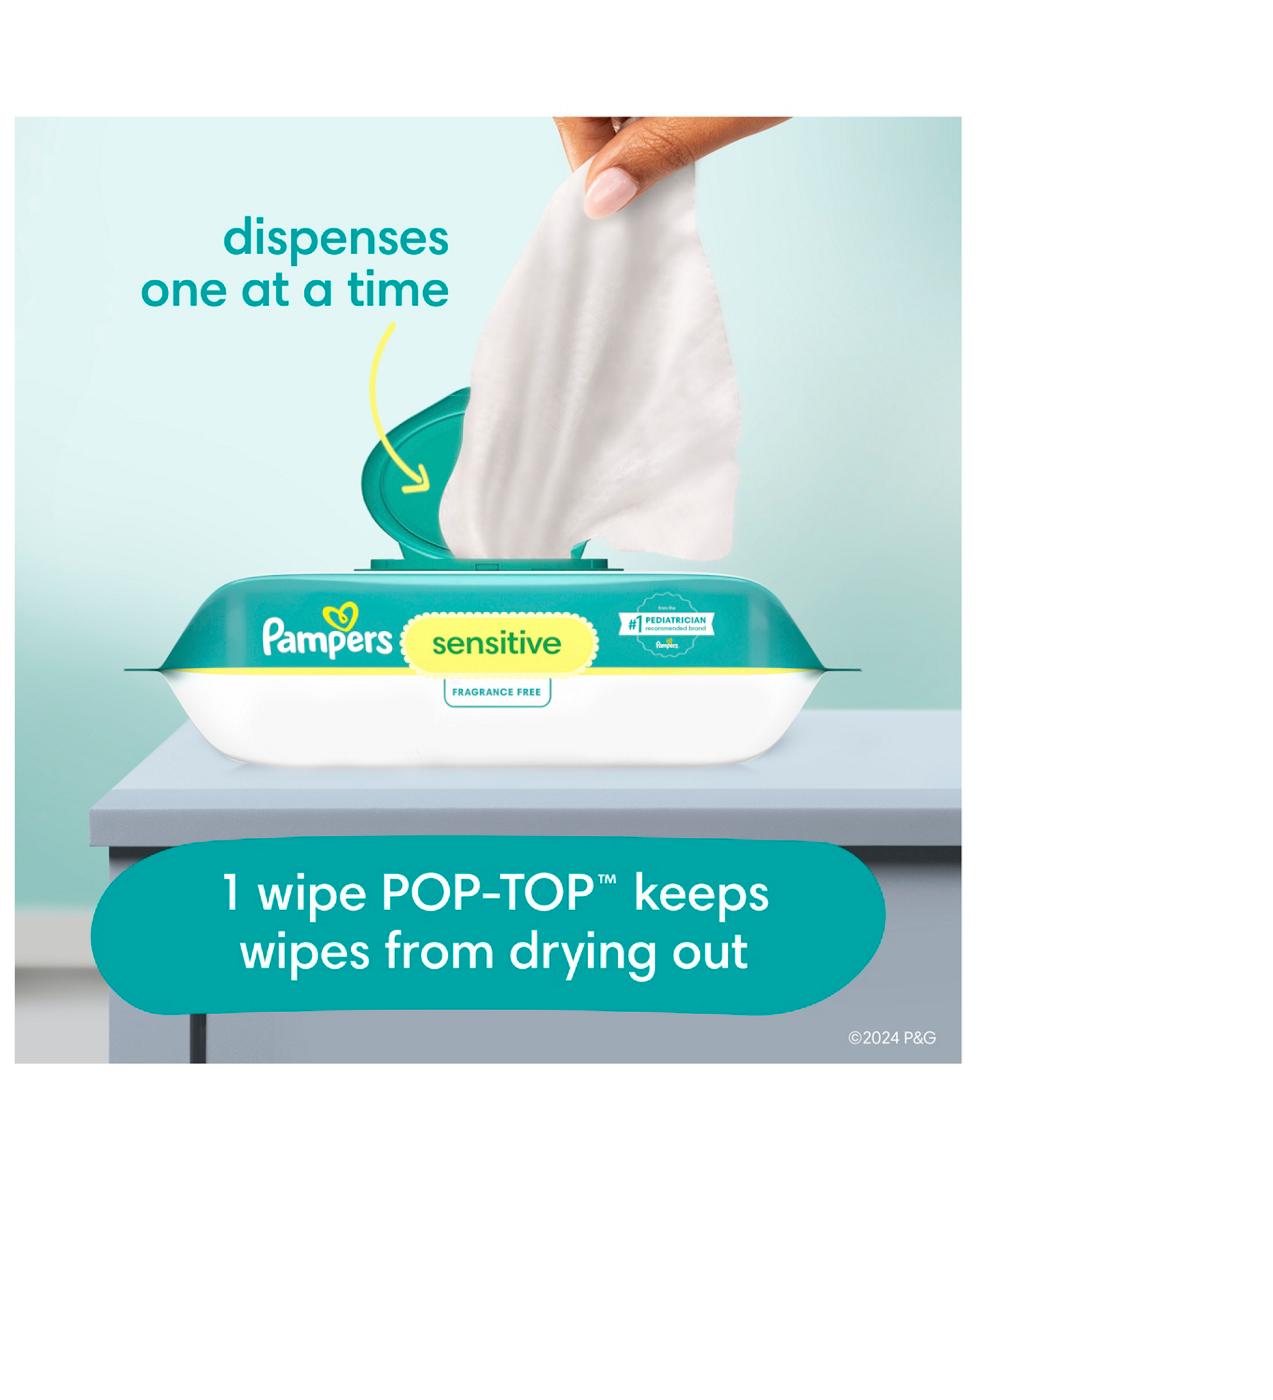 Pampers Sensitive Wipes 12 pk - Fragrance Free; image 5 of 10